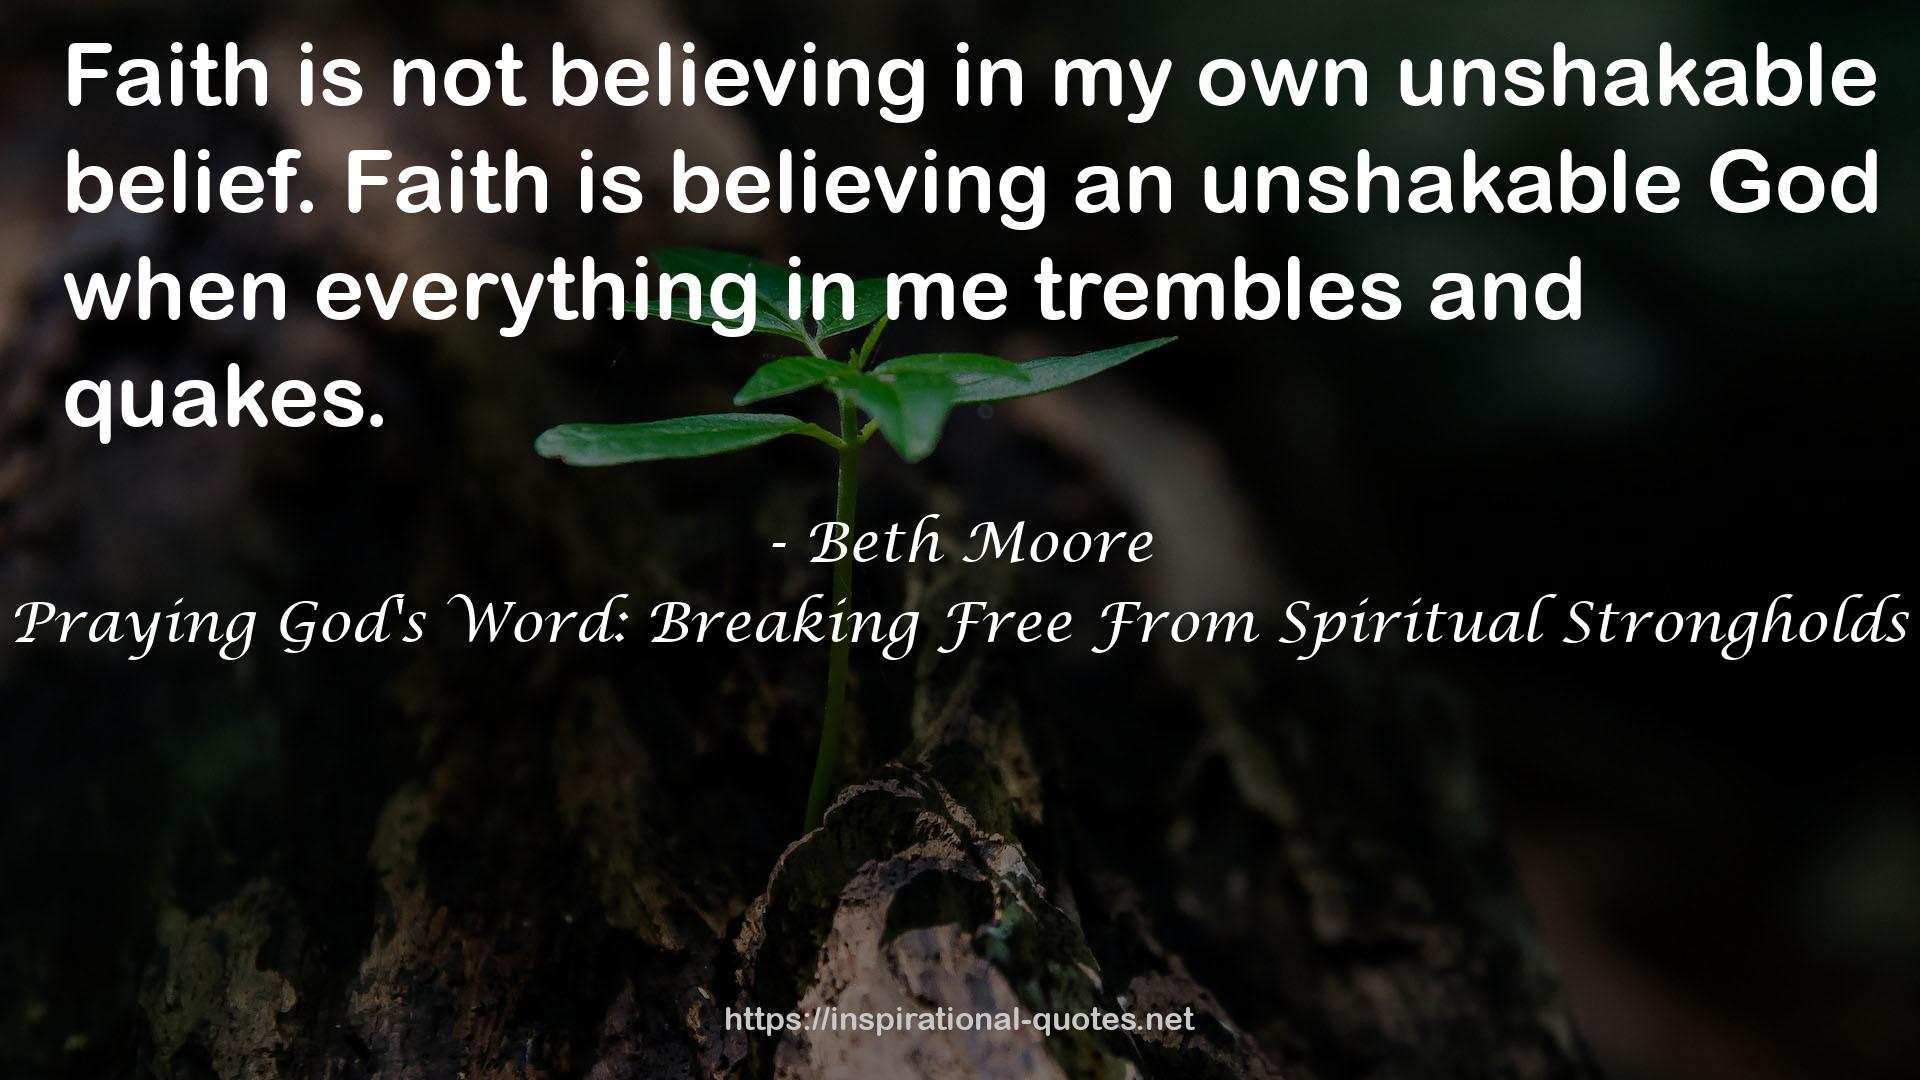 Praying God's Word: Breaking Free From Spiritual Strongholds QUOTES